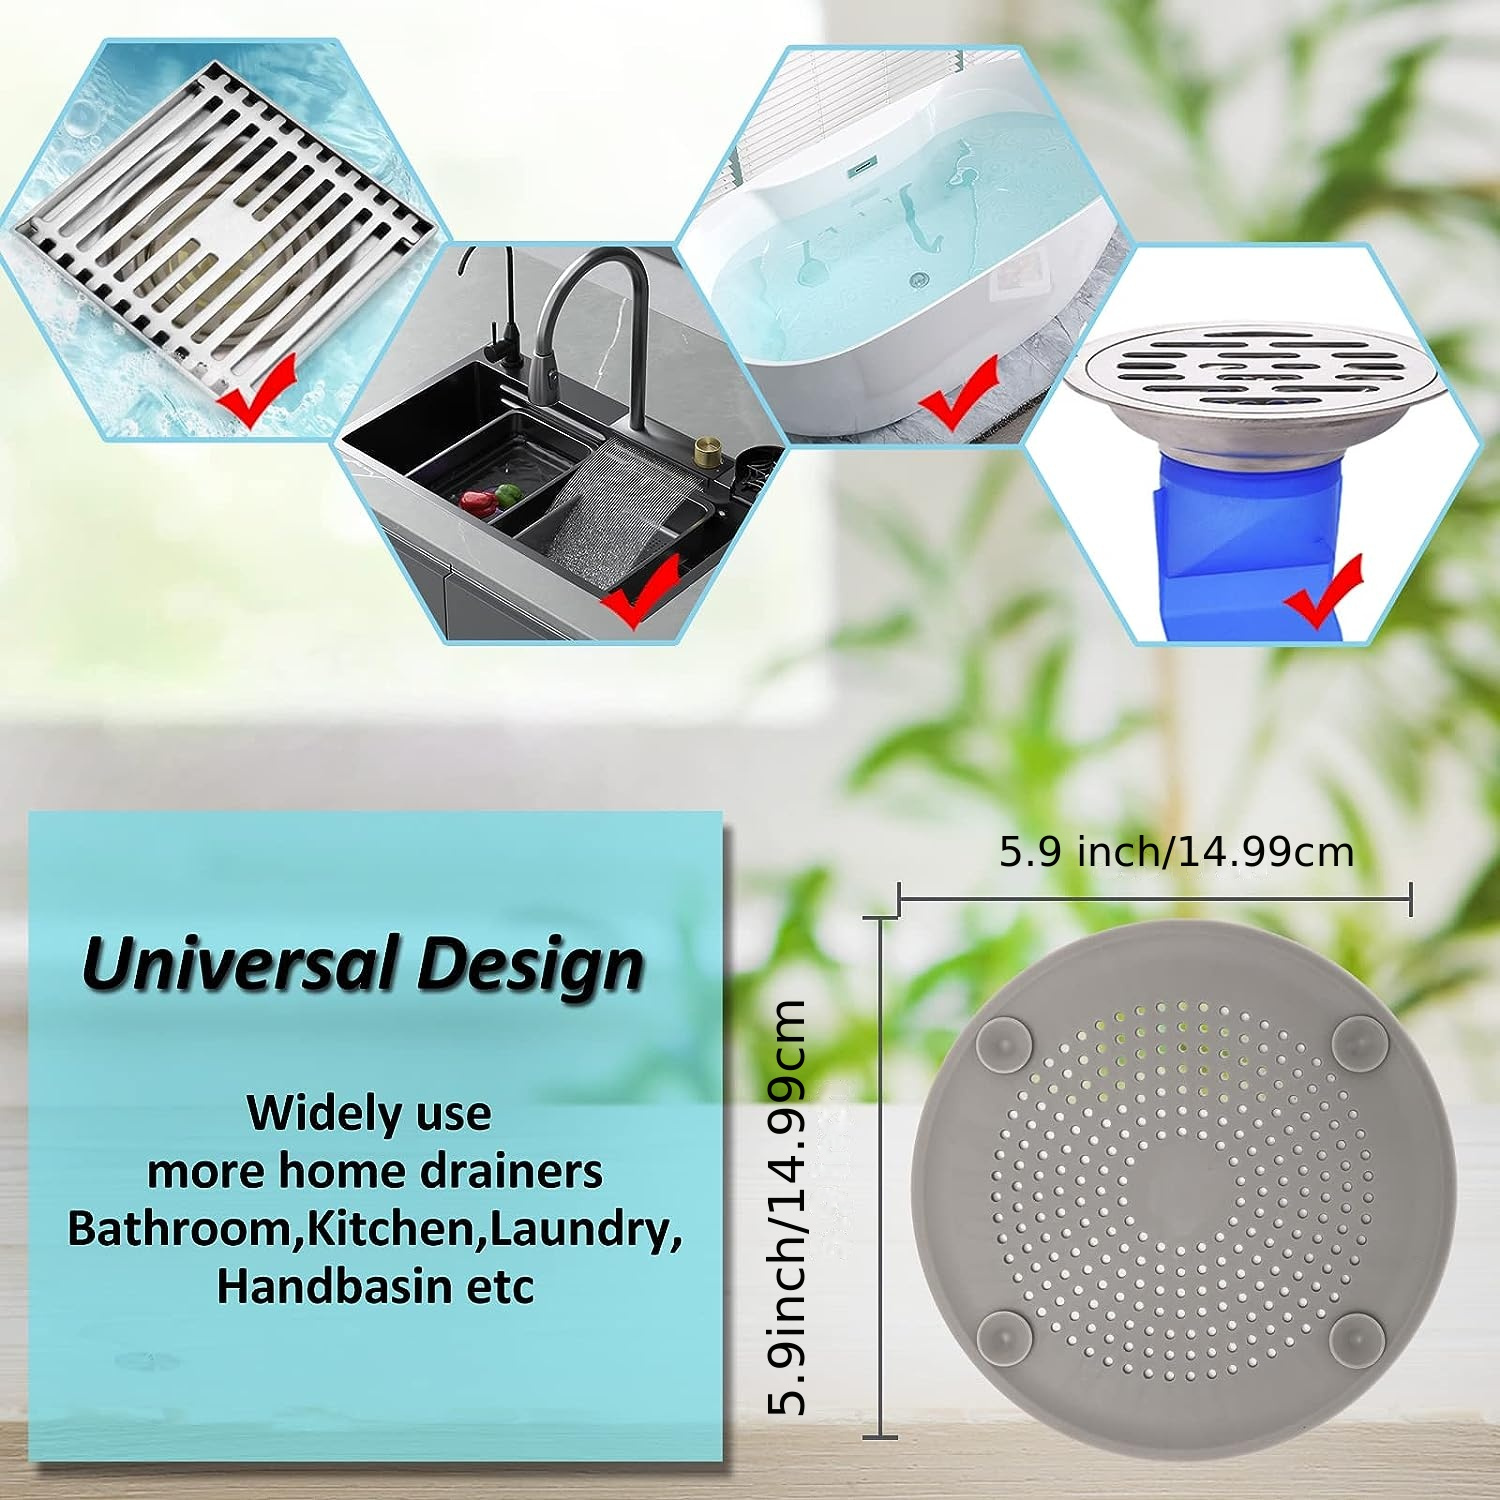 Household Sink Filter Hair Catcher, Floor Drain Anti-clog Hair Stopper,  Silicone Shower Drain Cover, Suction Cup Design Shower Drain Protector,  Multifunction Drain Cover Filter For Home Bathroom, Home Essentials,  Bathroom Accessories 